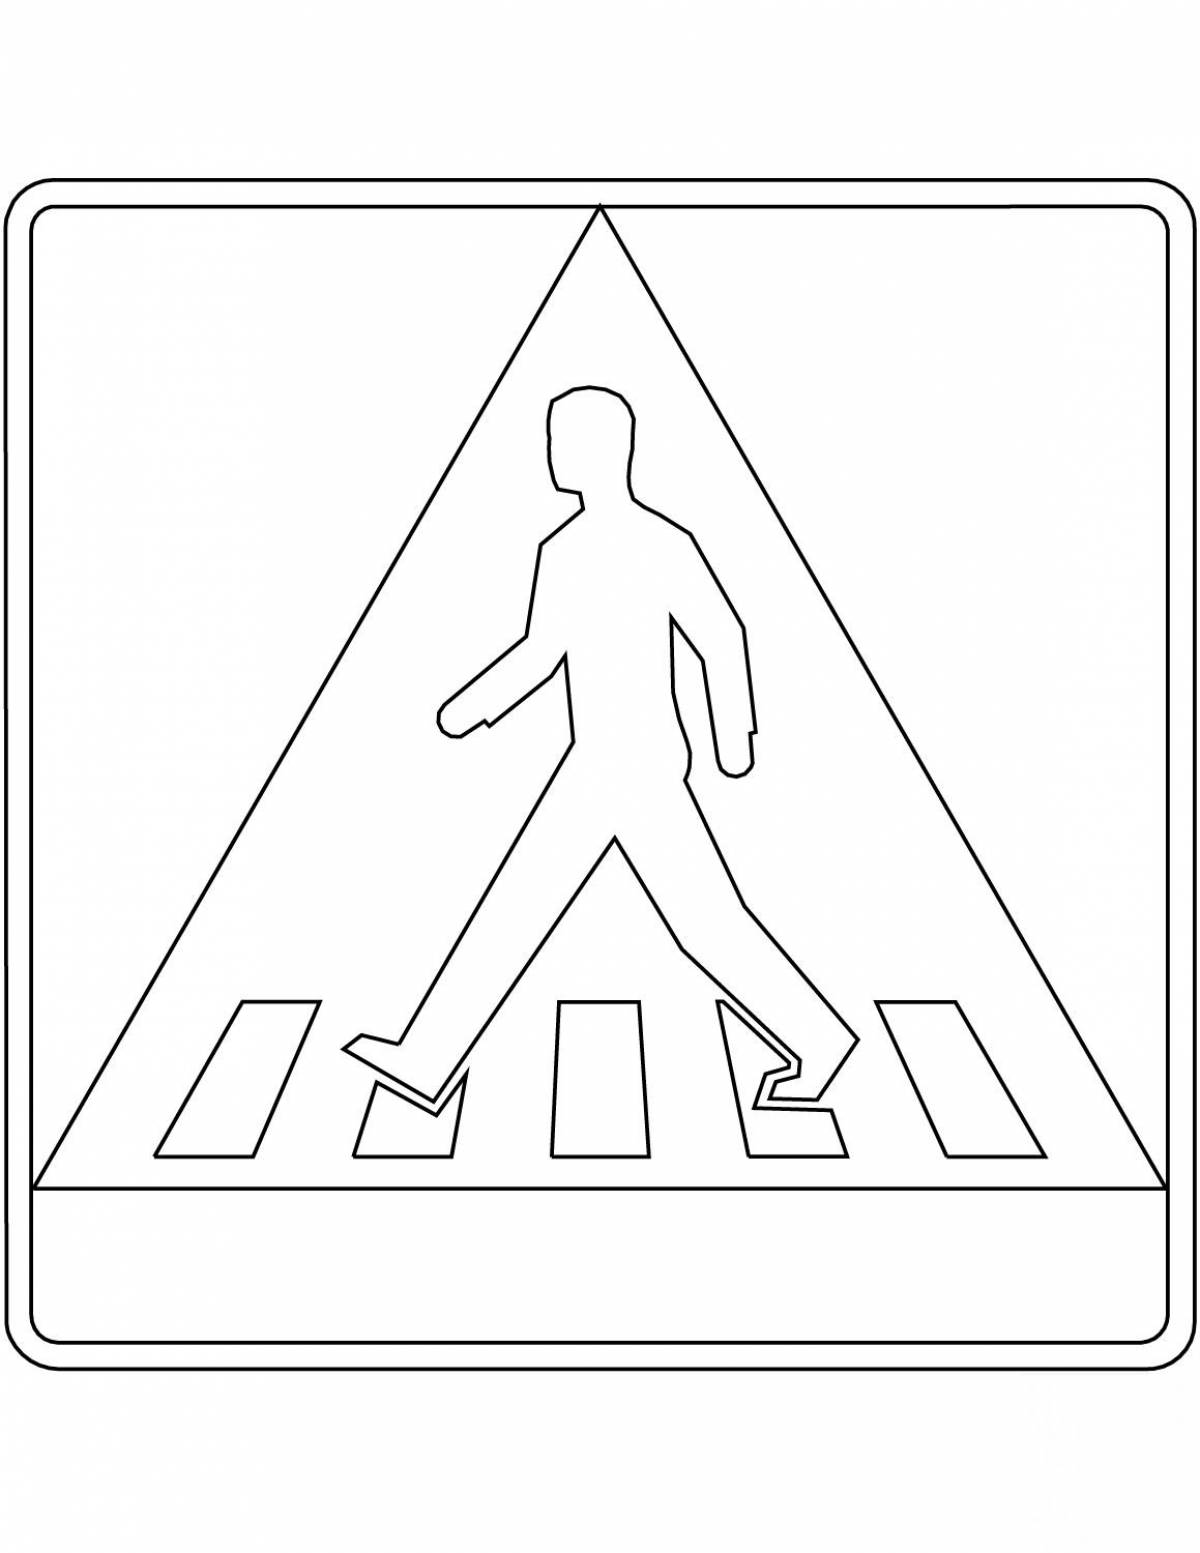 Crossing sign #8